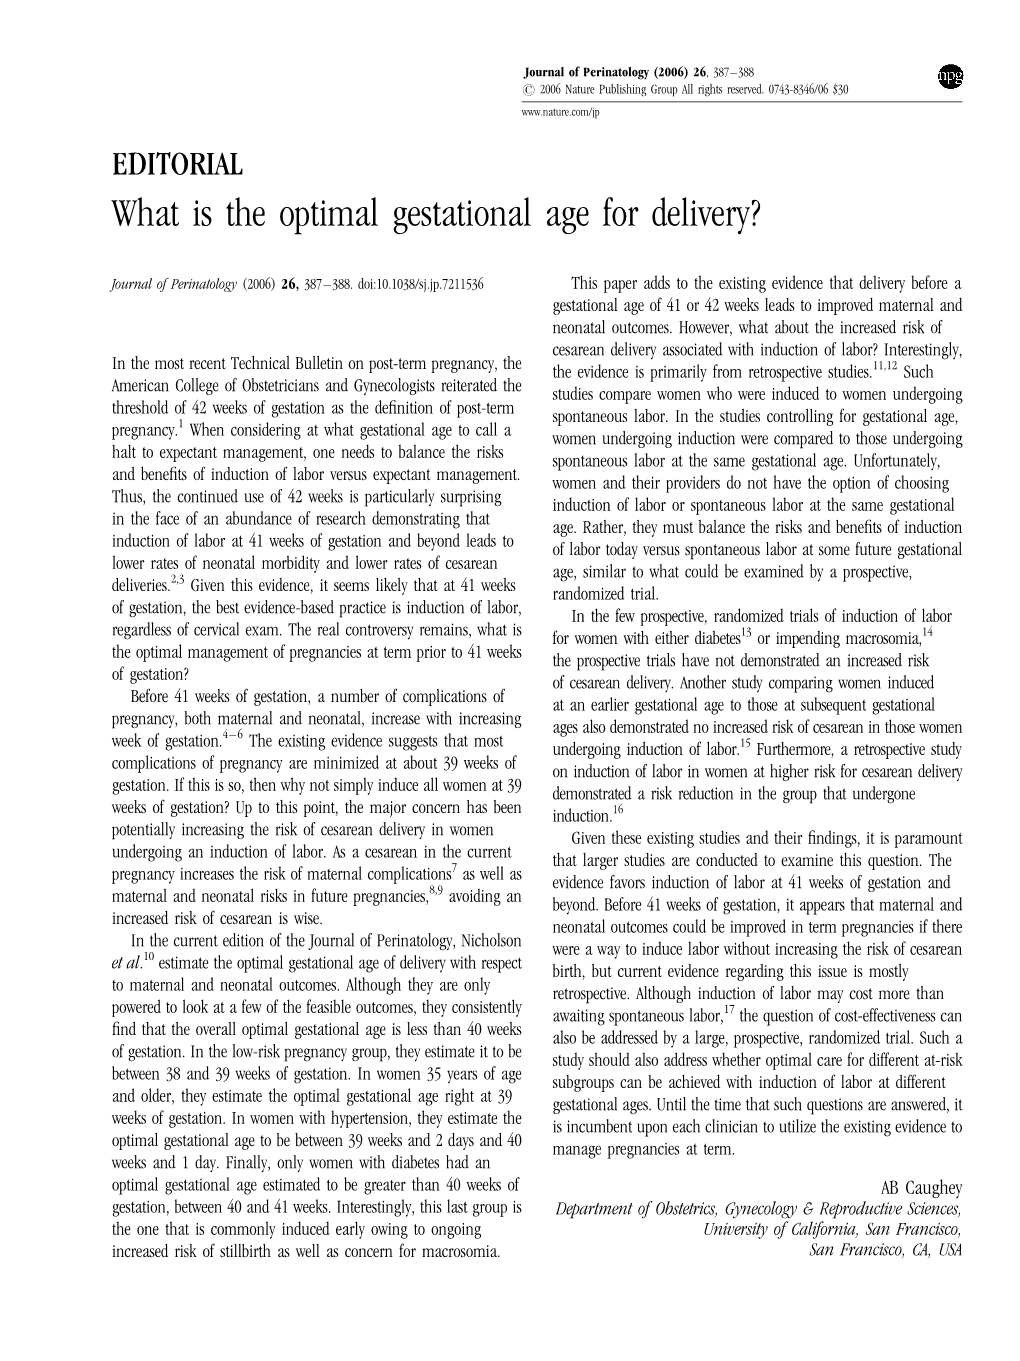 What Is the Optimal Gestational Age for Delivery?